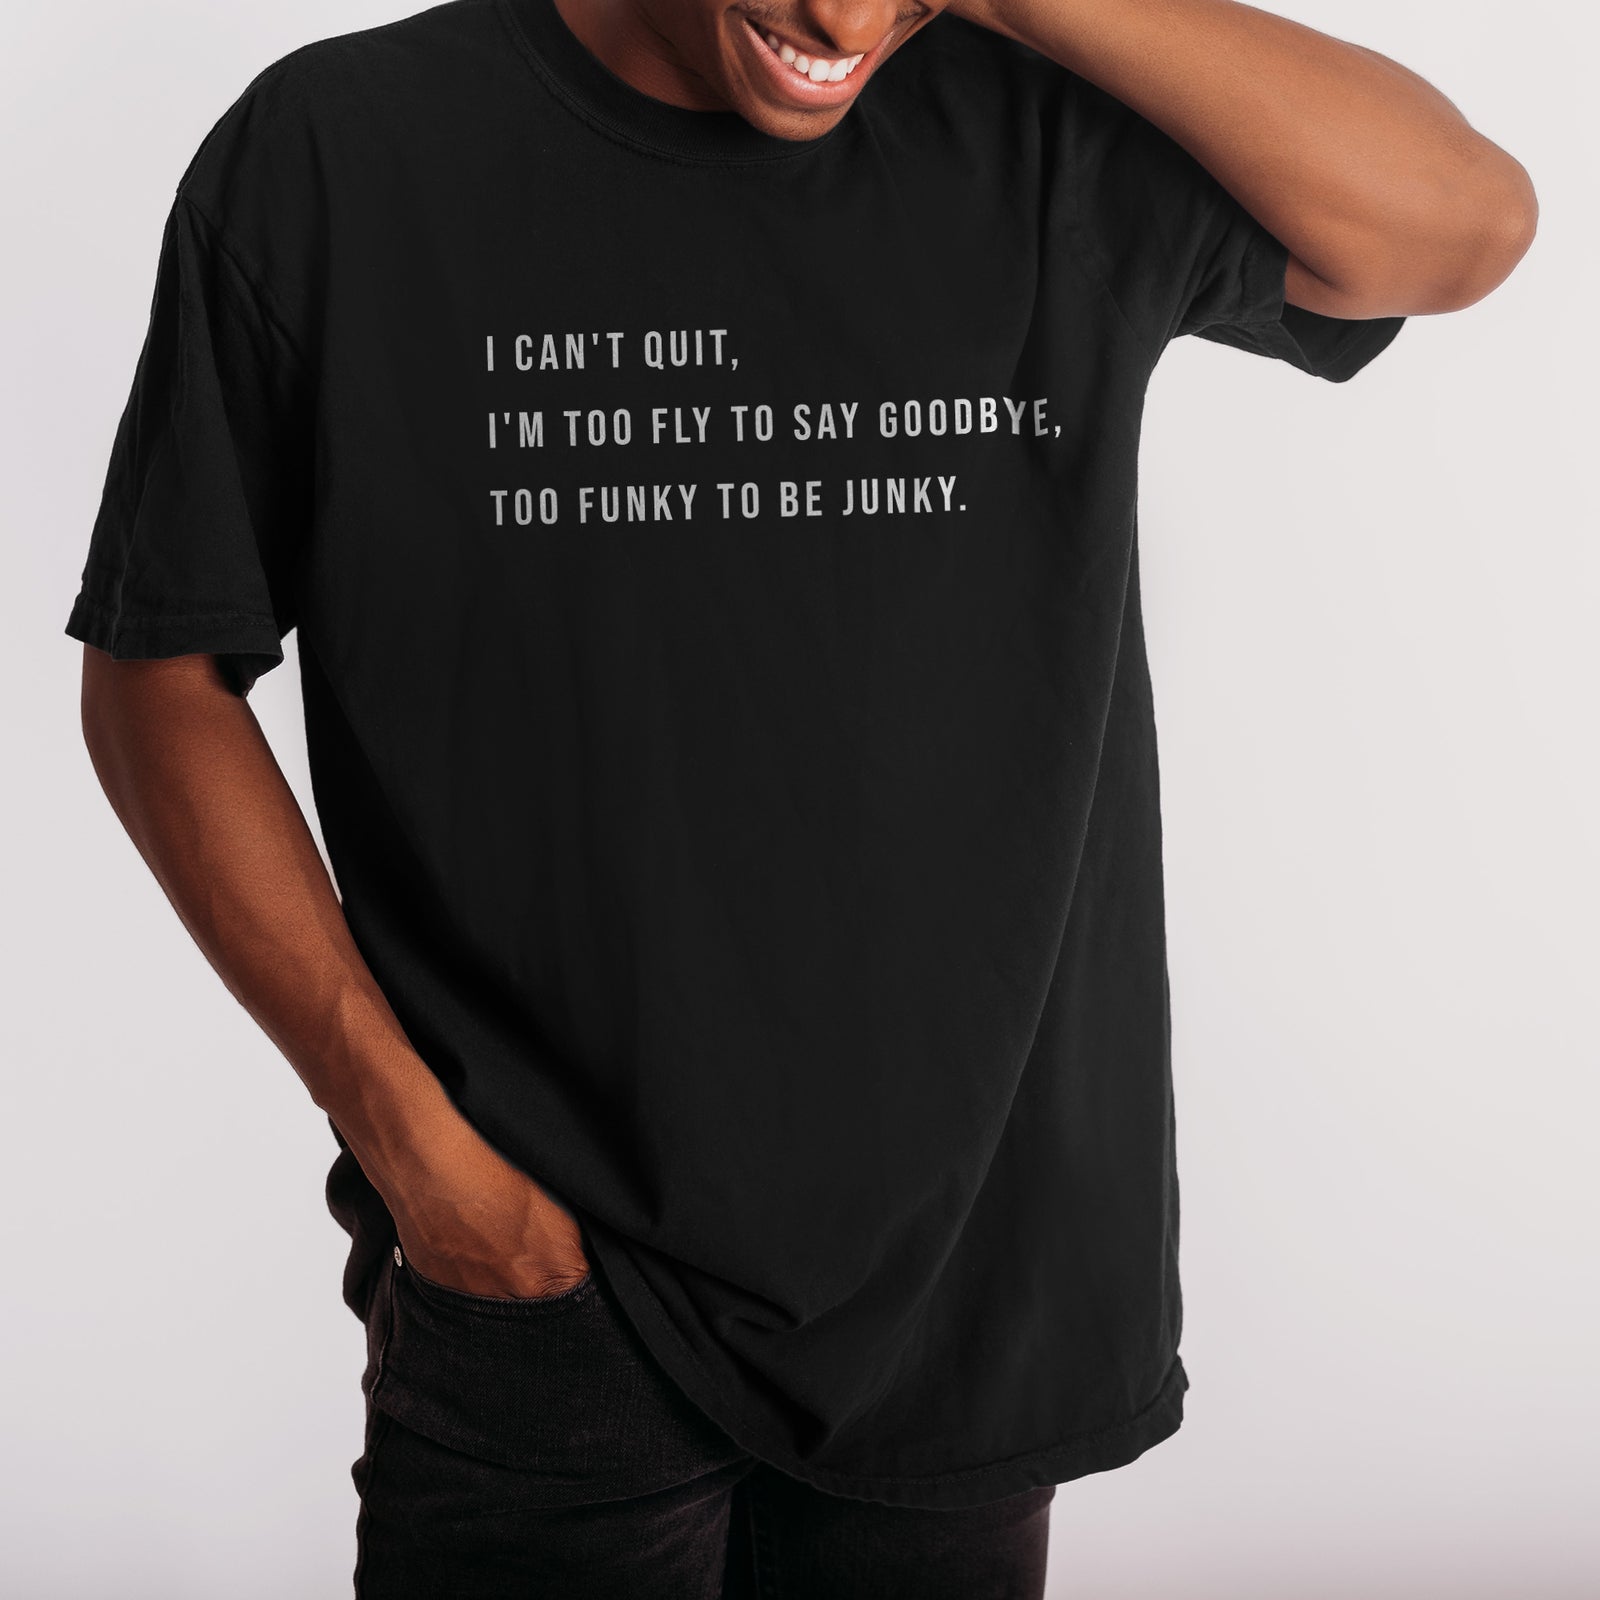 I Can't Quit, I'm Too Fly to Say Goodbye, Too Funky to be Junky Boyfriend Crew Tee Solid Black Closeup Artwork and Texture